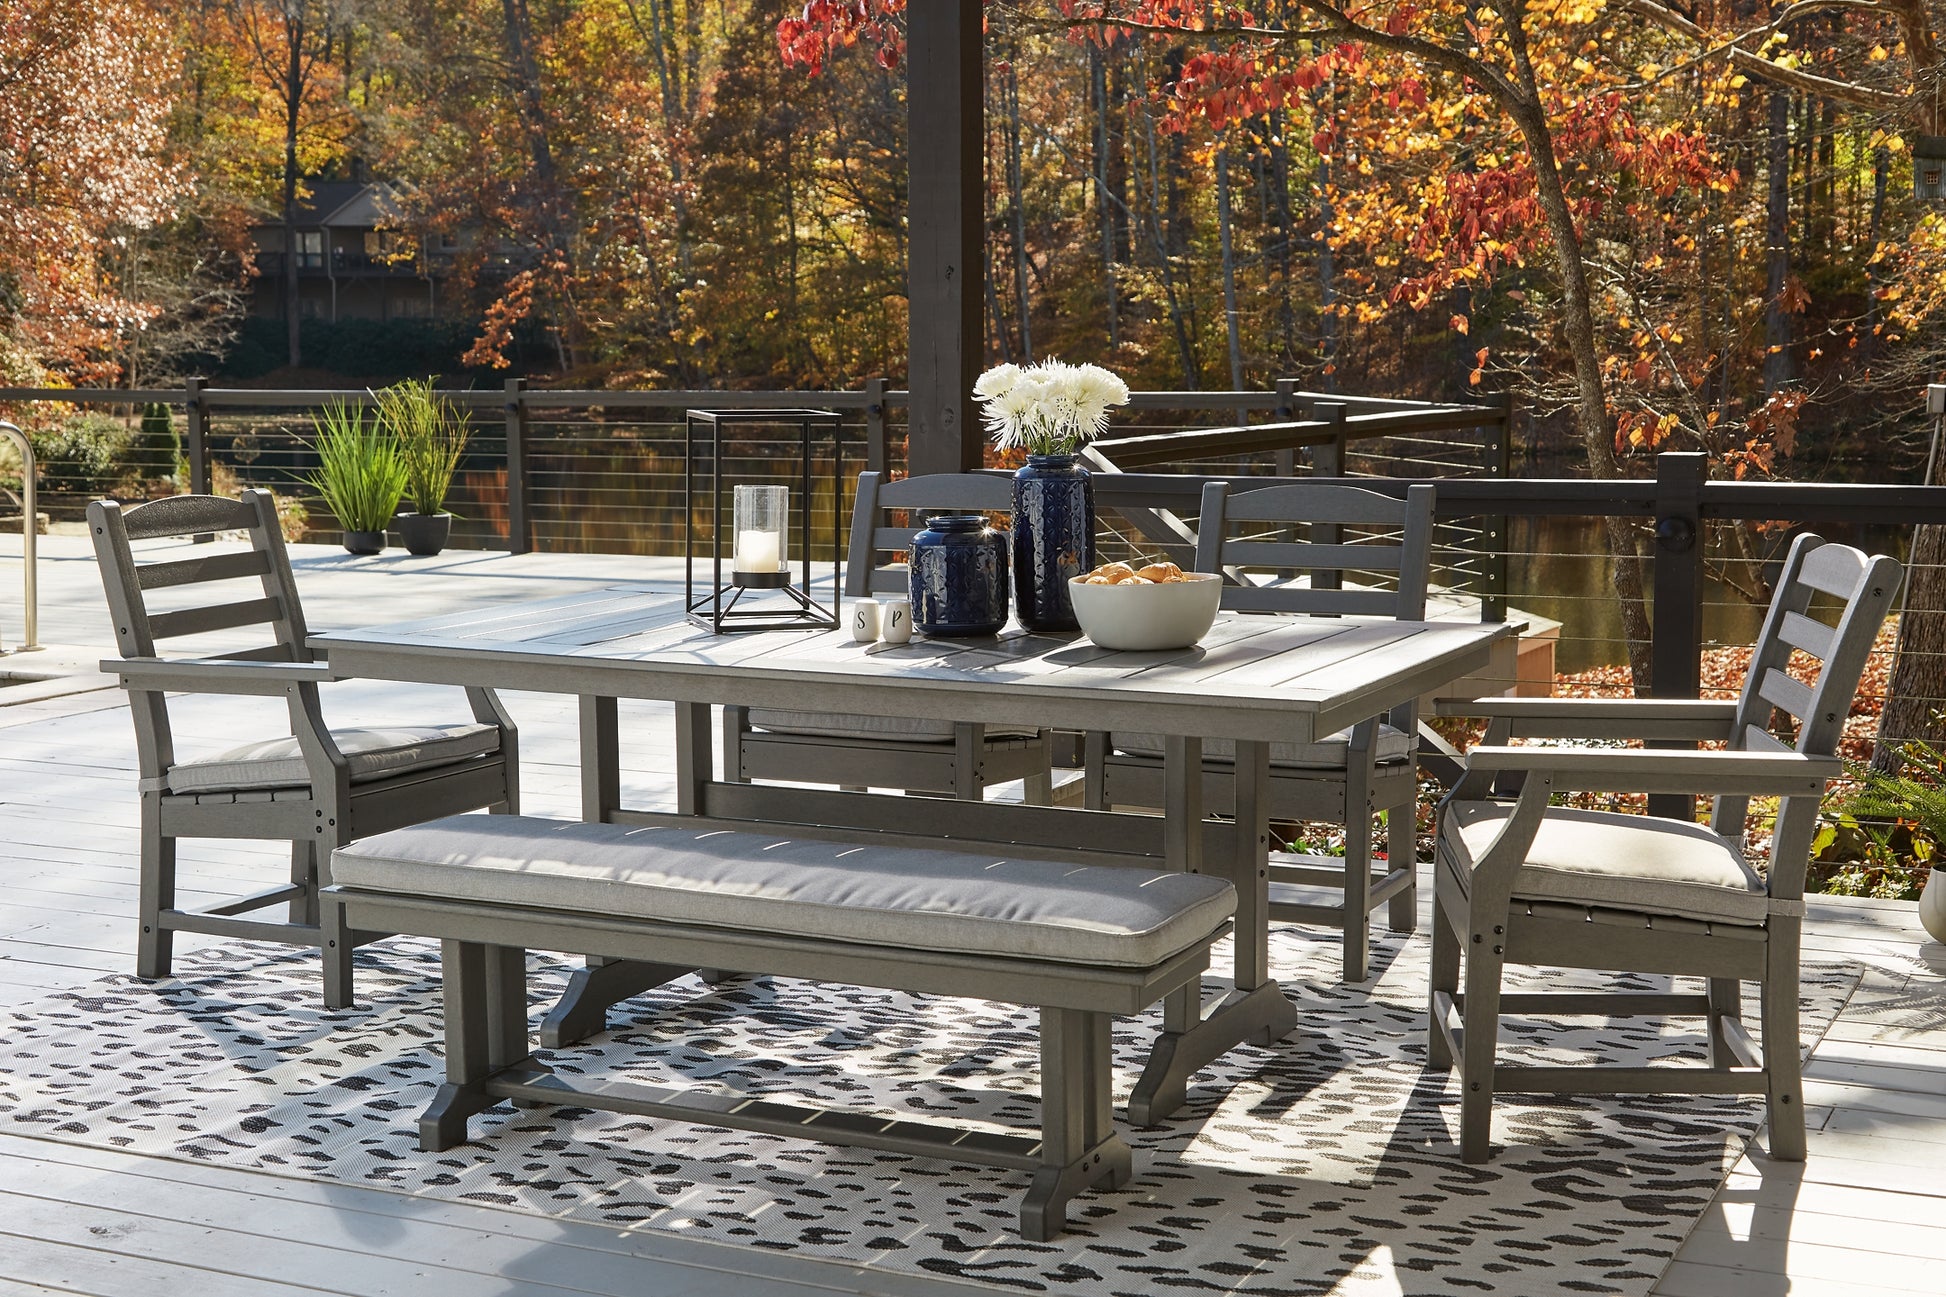 Visola Outdoor Dining Table and 4 Chairs and Bench Wilson Furniture (OH)  in Bridgeport, Ohio. Serving Moundsville, Richmond, Smithfield, Cadiz, & St. Clairesville